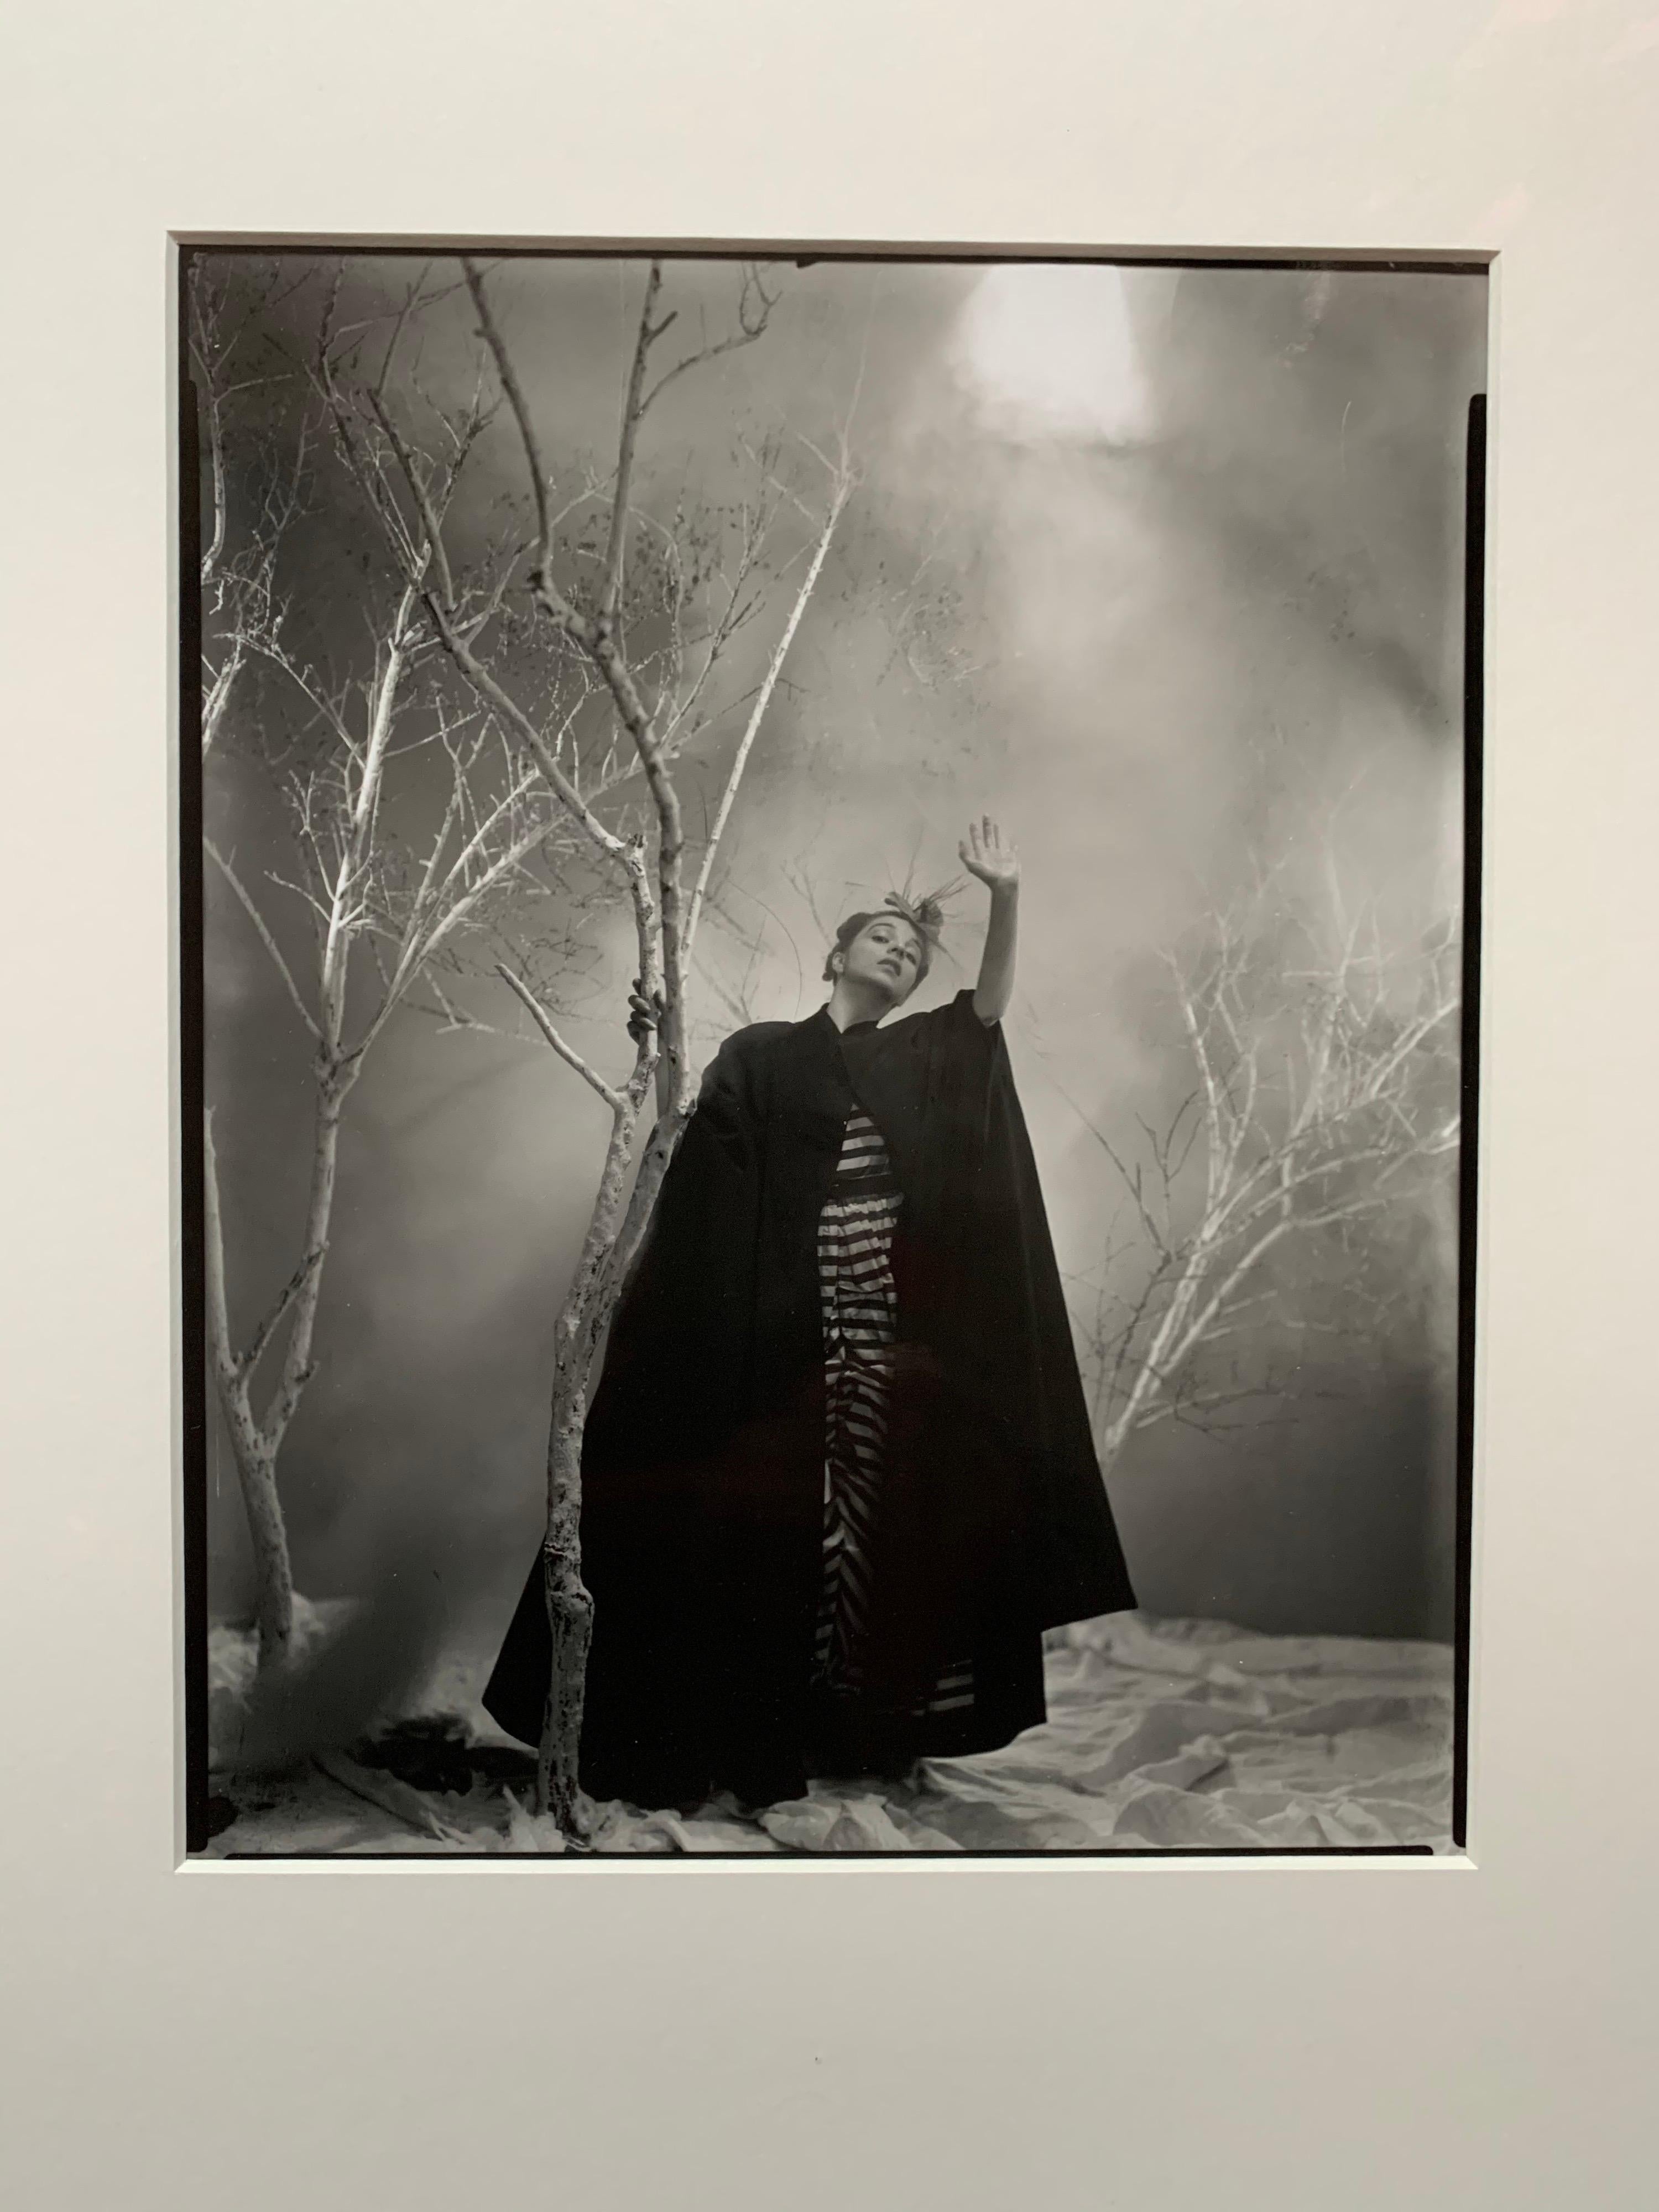 This silver gelatin photograph was printed in 1999 from the original negative by the Robert Miller Gallery in New York City with permission from the estate of the artist. George Platt Lynes (1907-1955) was a legendary fashion photographer who shot